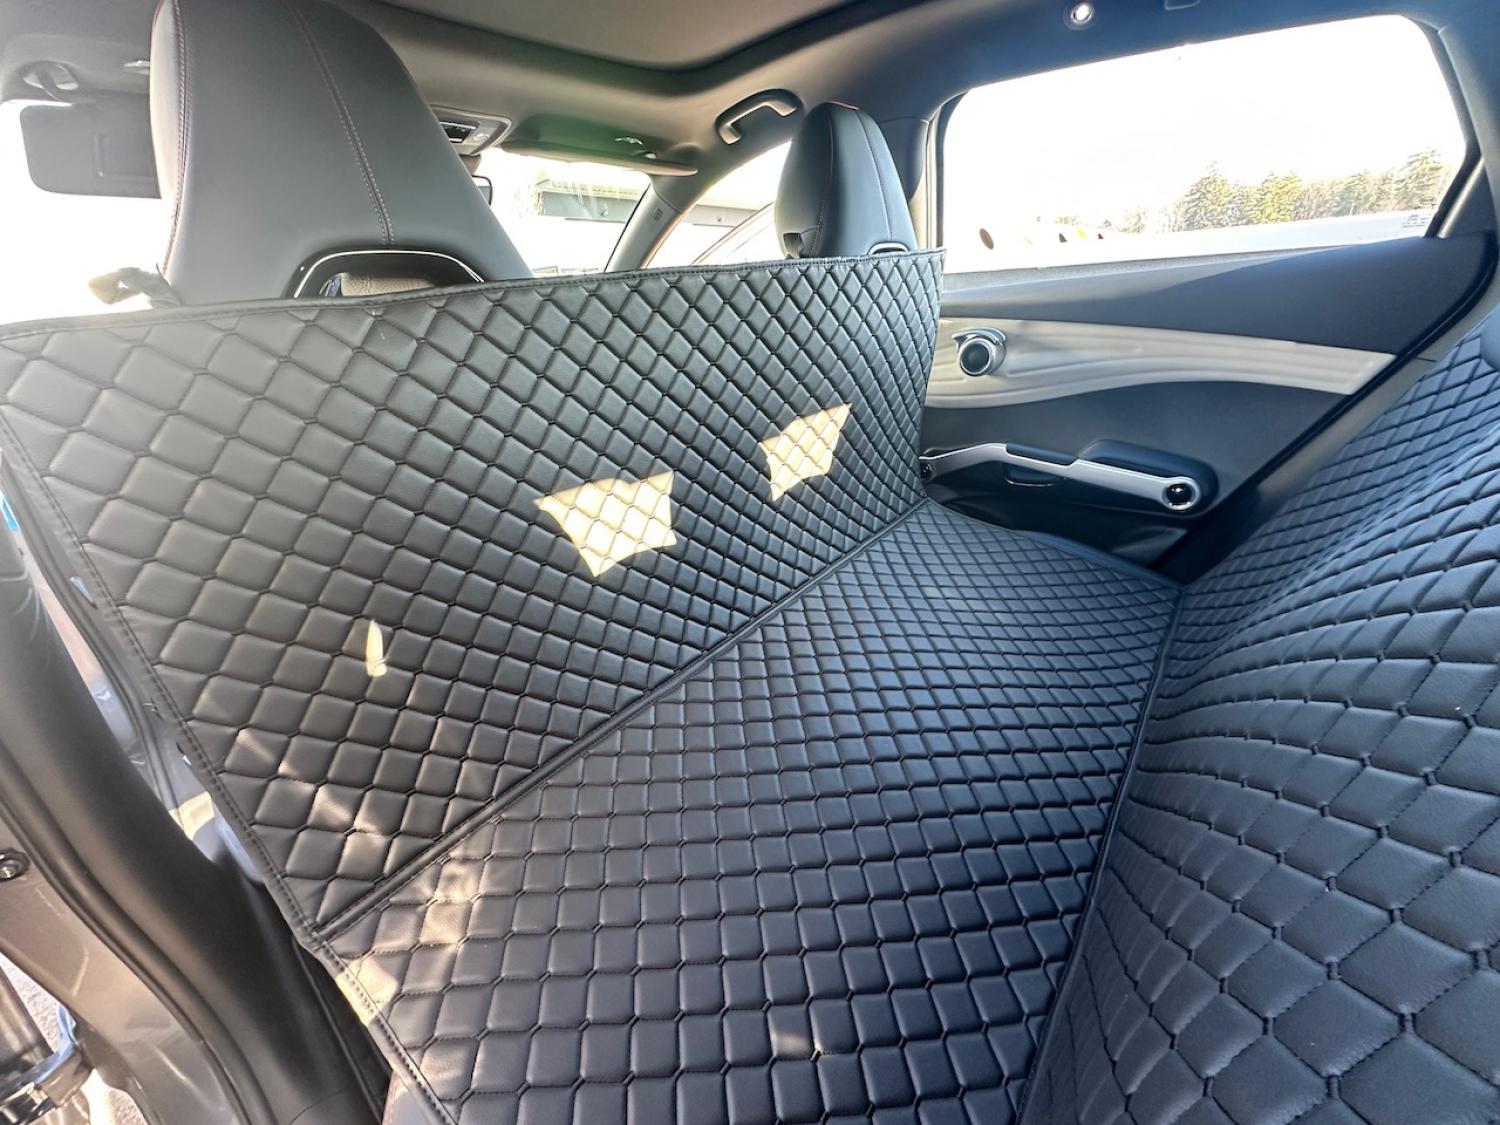 CARSTYLER® Back Seat Cover Geeignet Für Peugeot 508 PSE